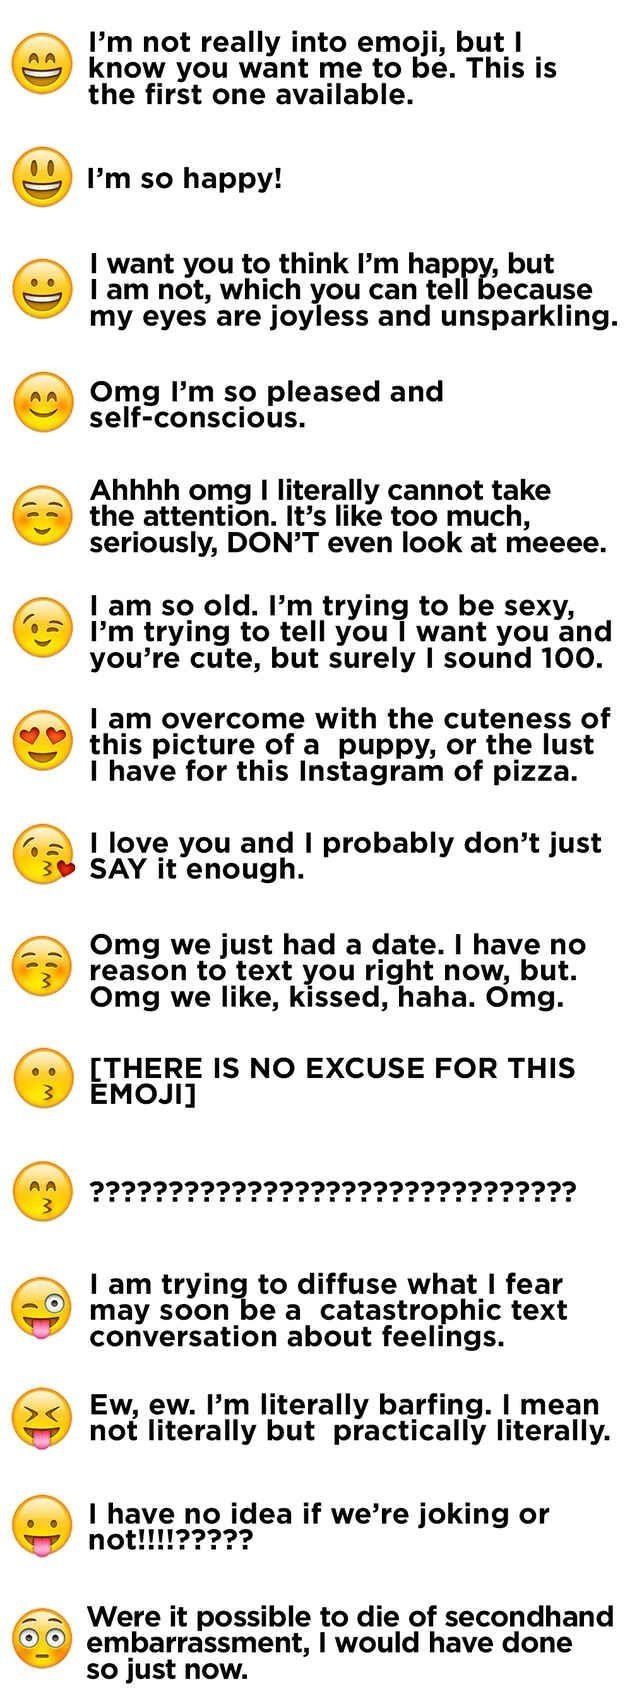 10 Lovely Crazy Ideas To Do With Friends 9 best emoji images on pinterest funny stuff jokes and the emoji 1 2023